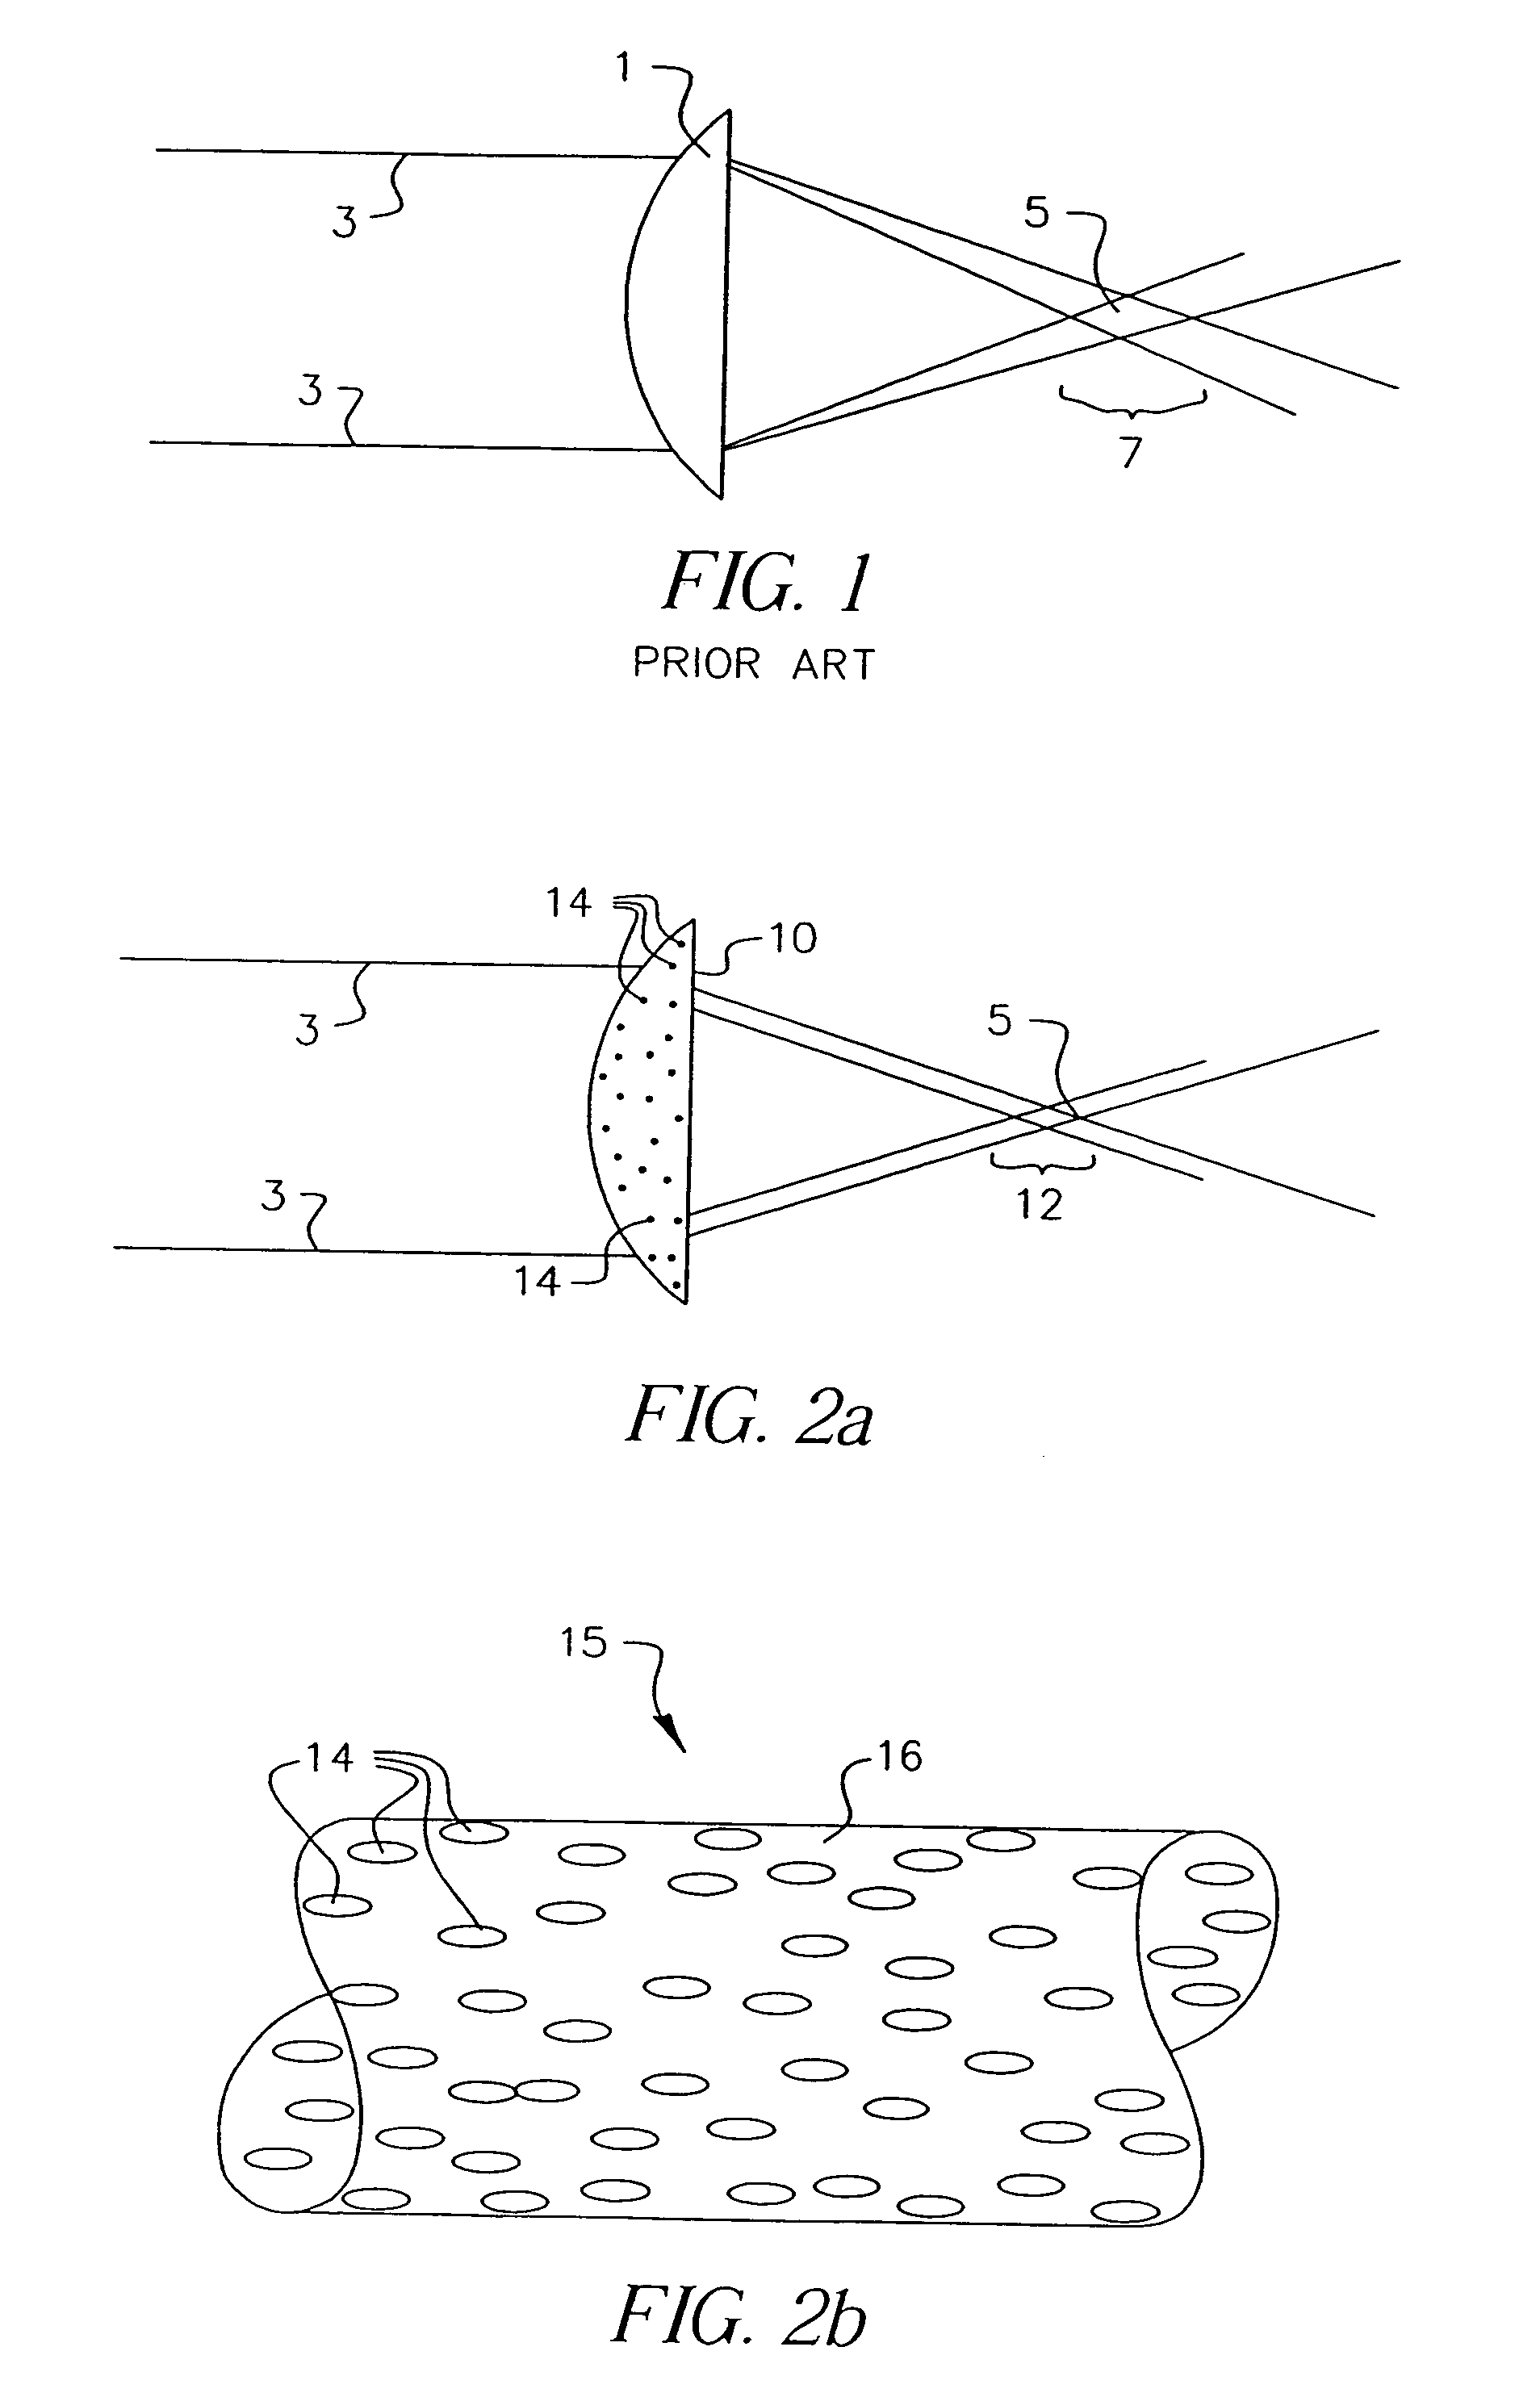 Reduced temperature sensitive polymeric optical article and method of making same